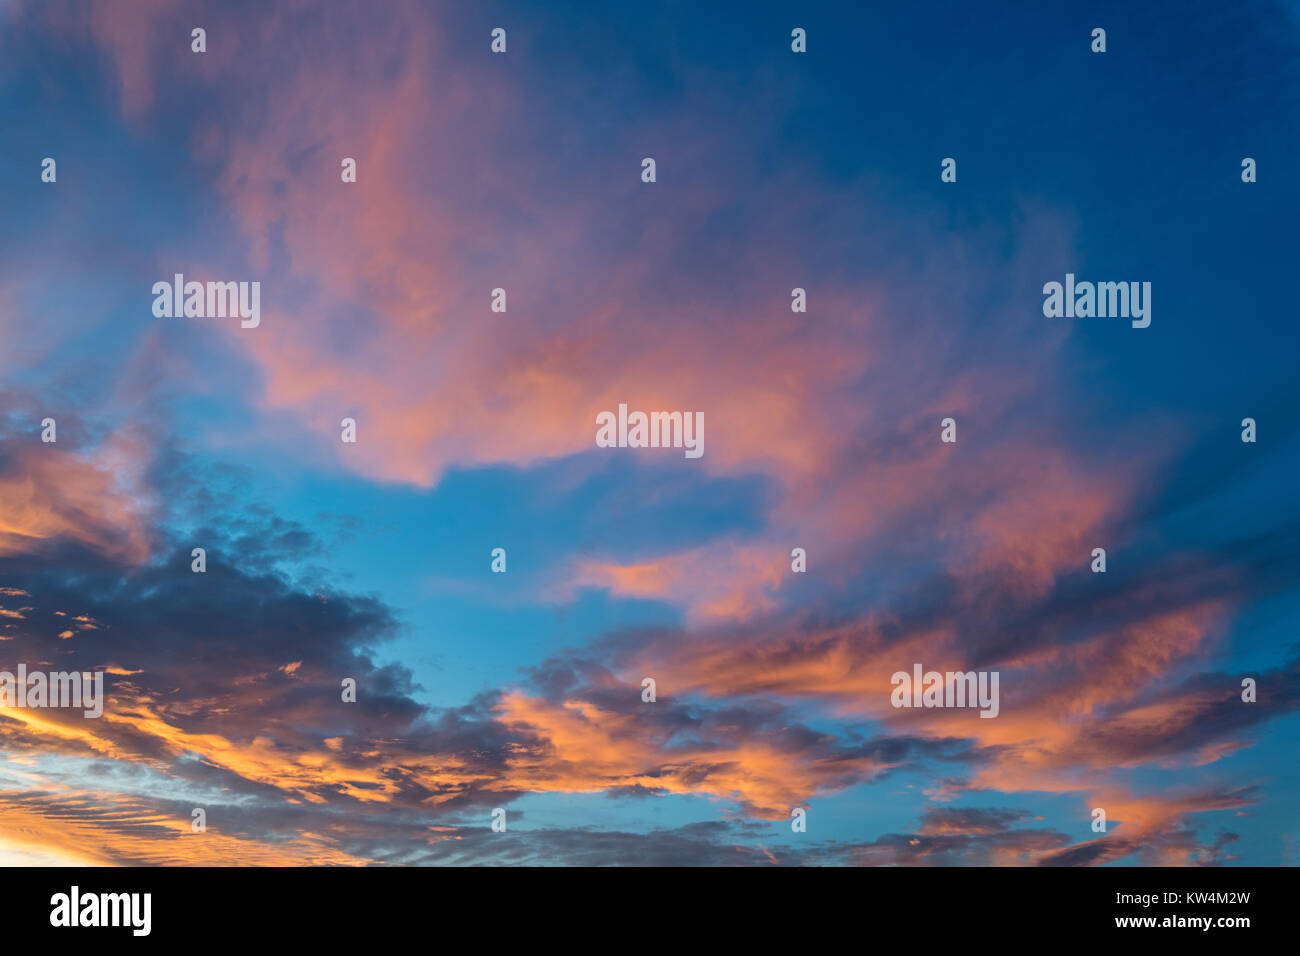 Sunset sky with clouds Stock Photo